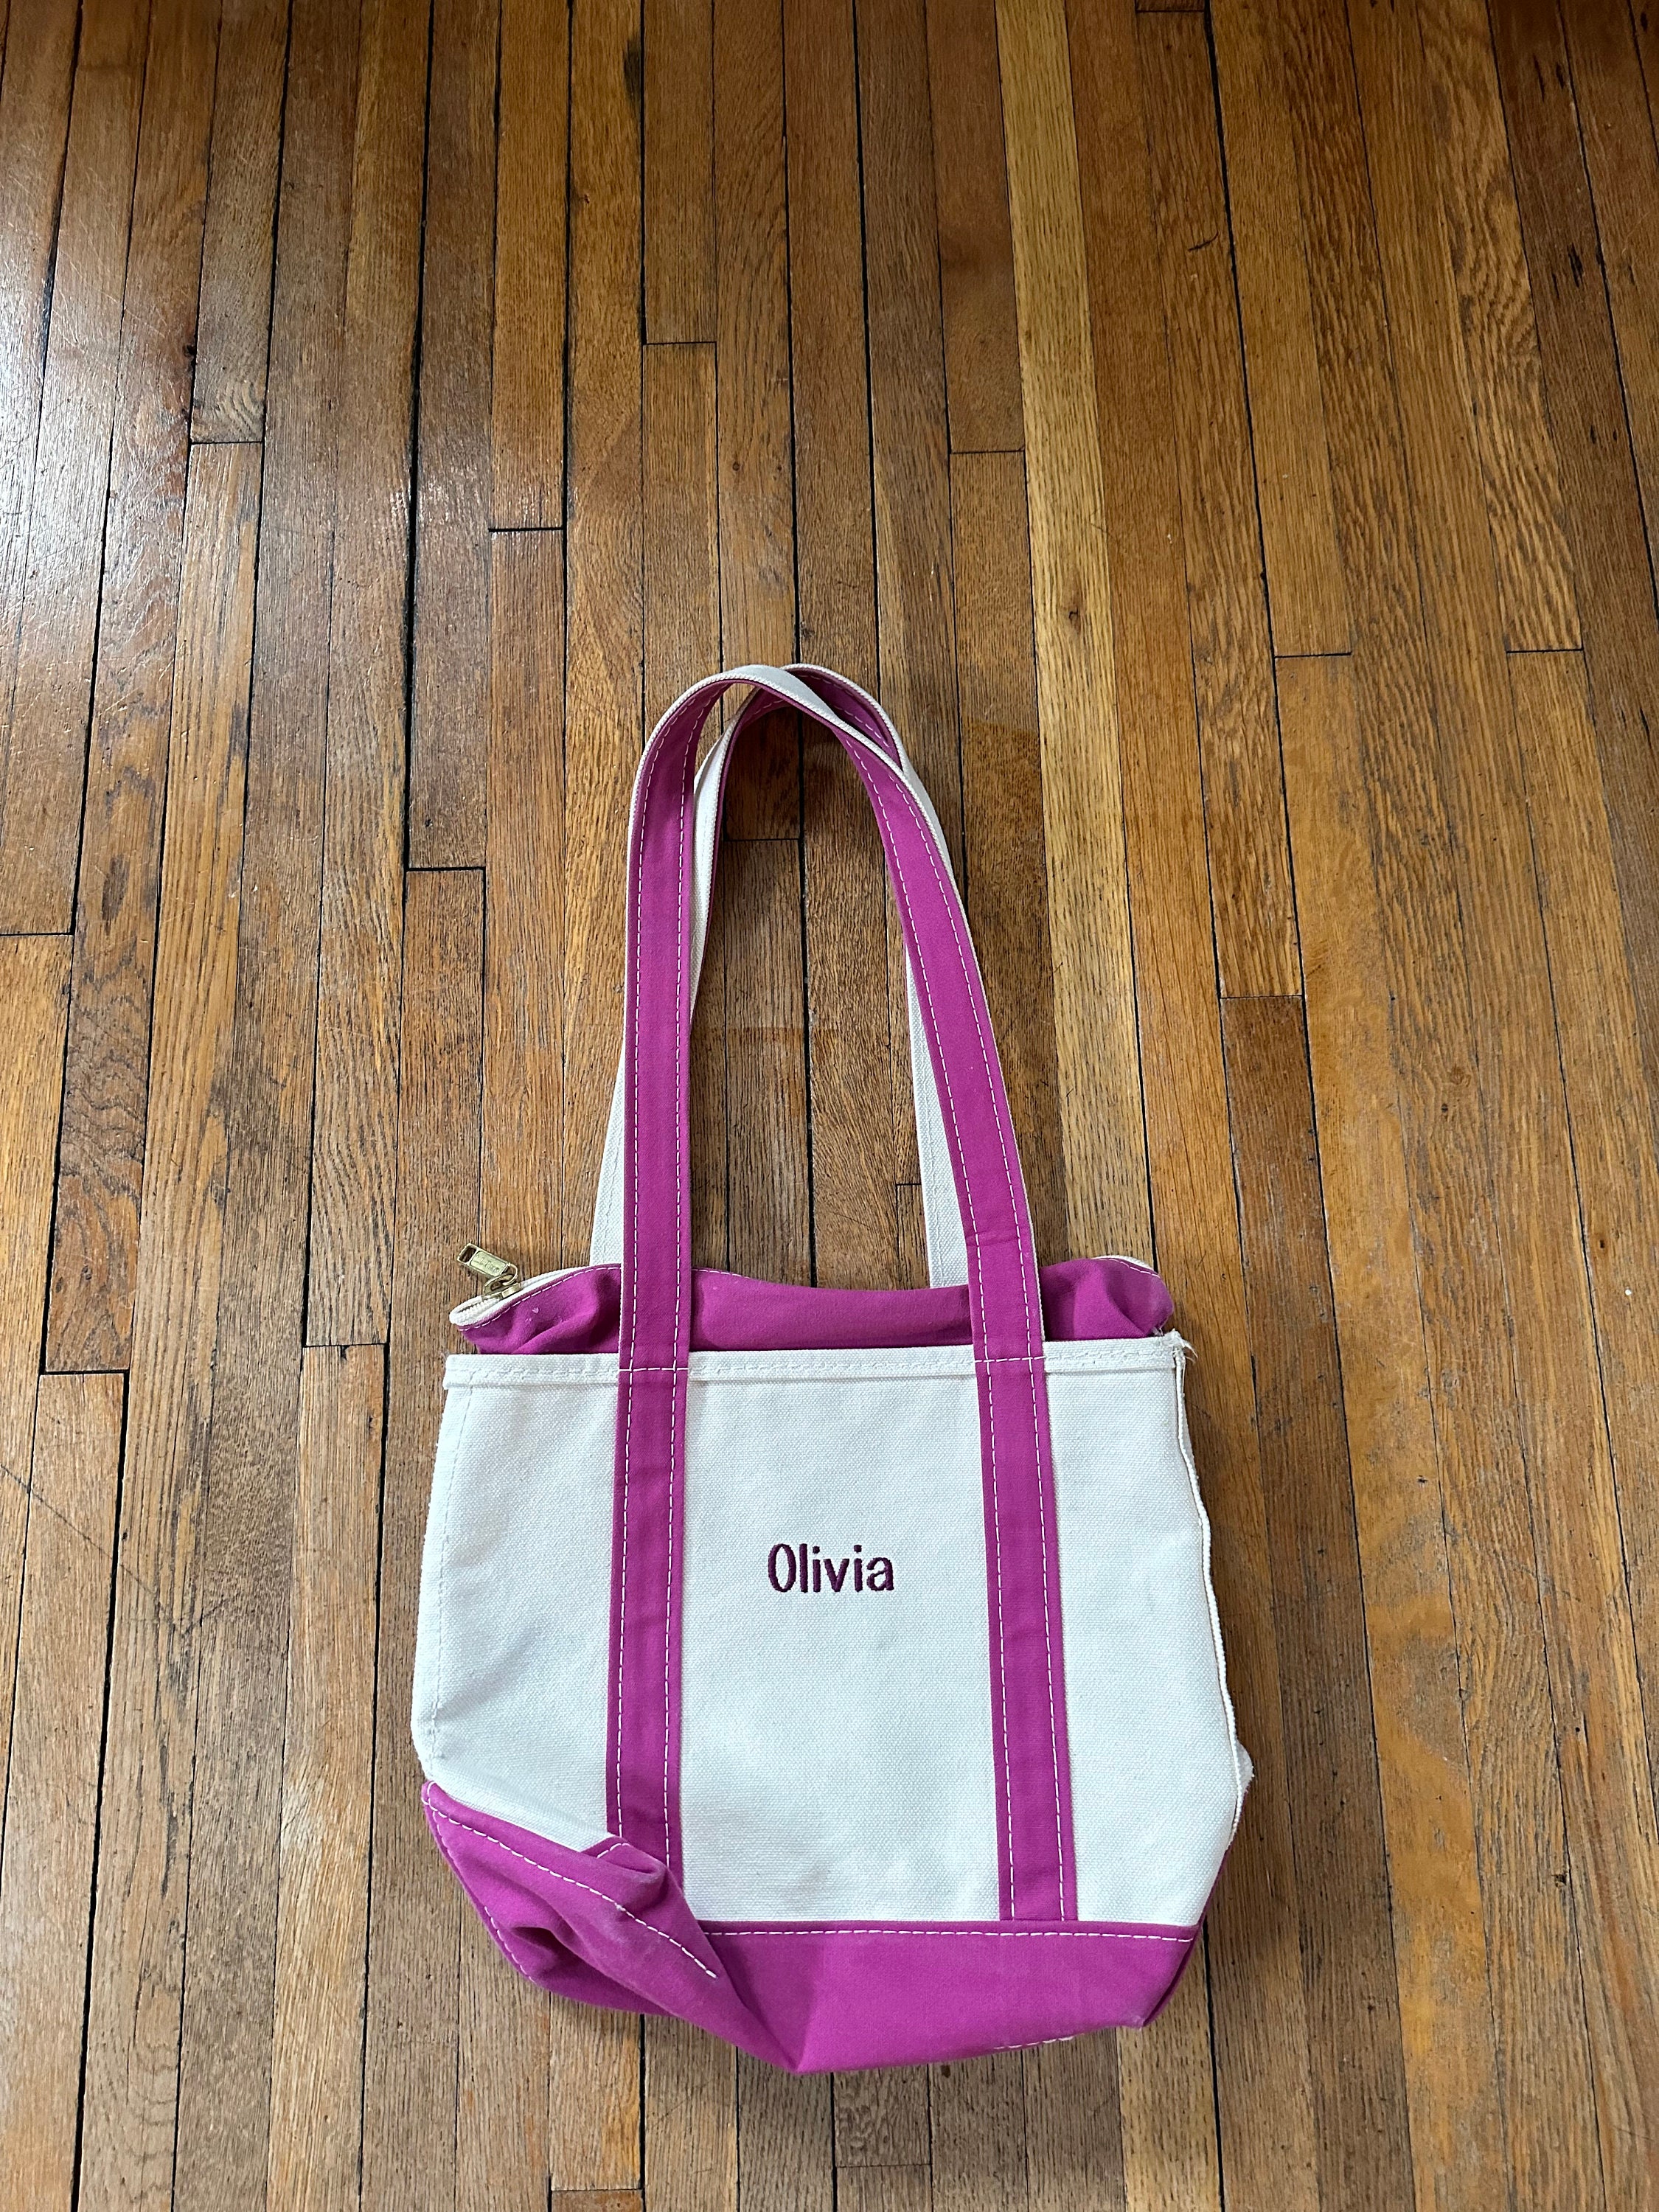 Best boat and tote monograms 👏 #llbeantote #llbean #boatandtote #icon, tote bags